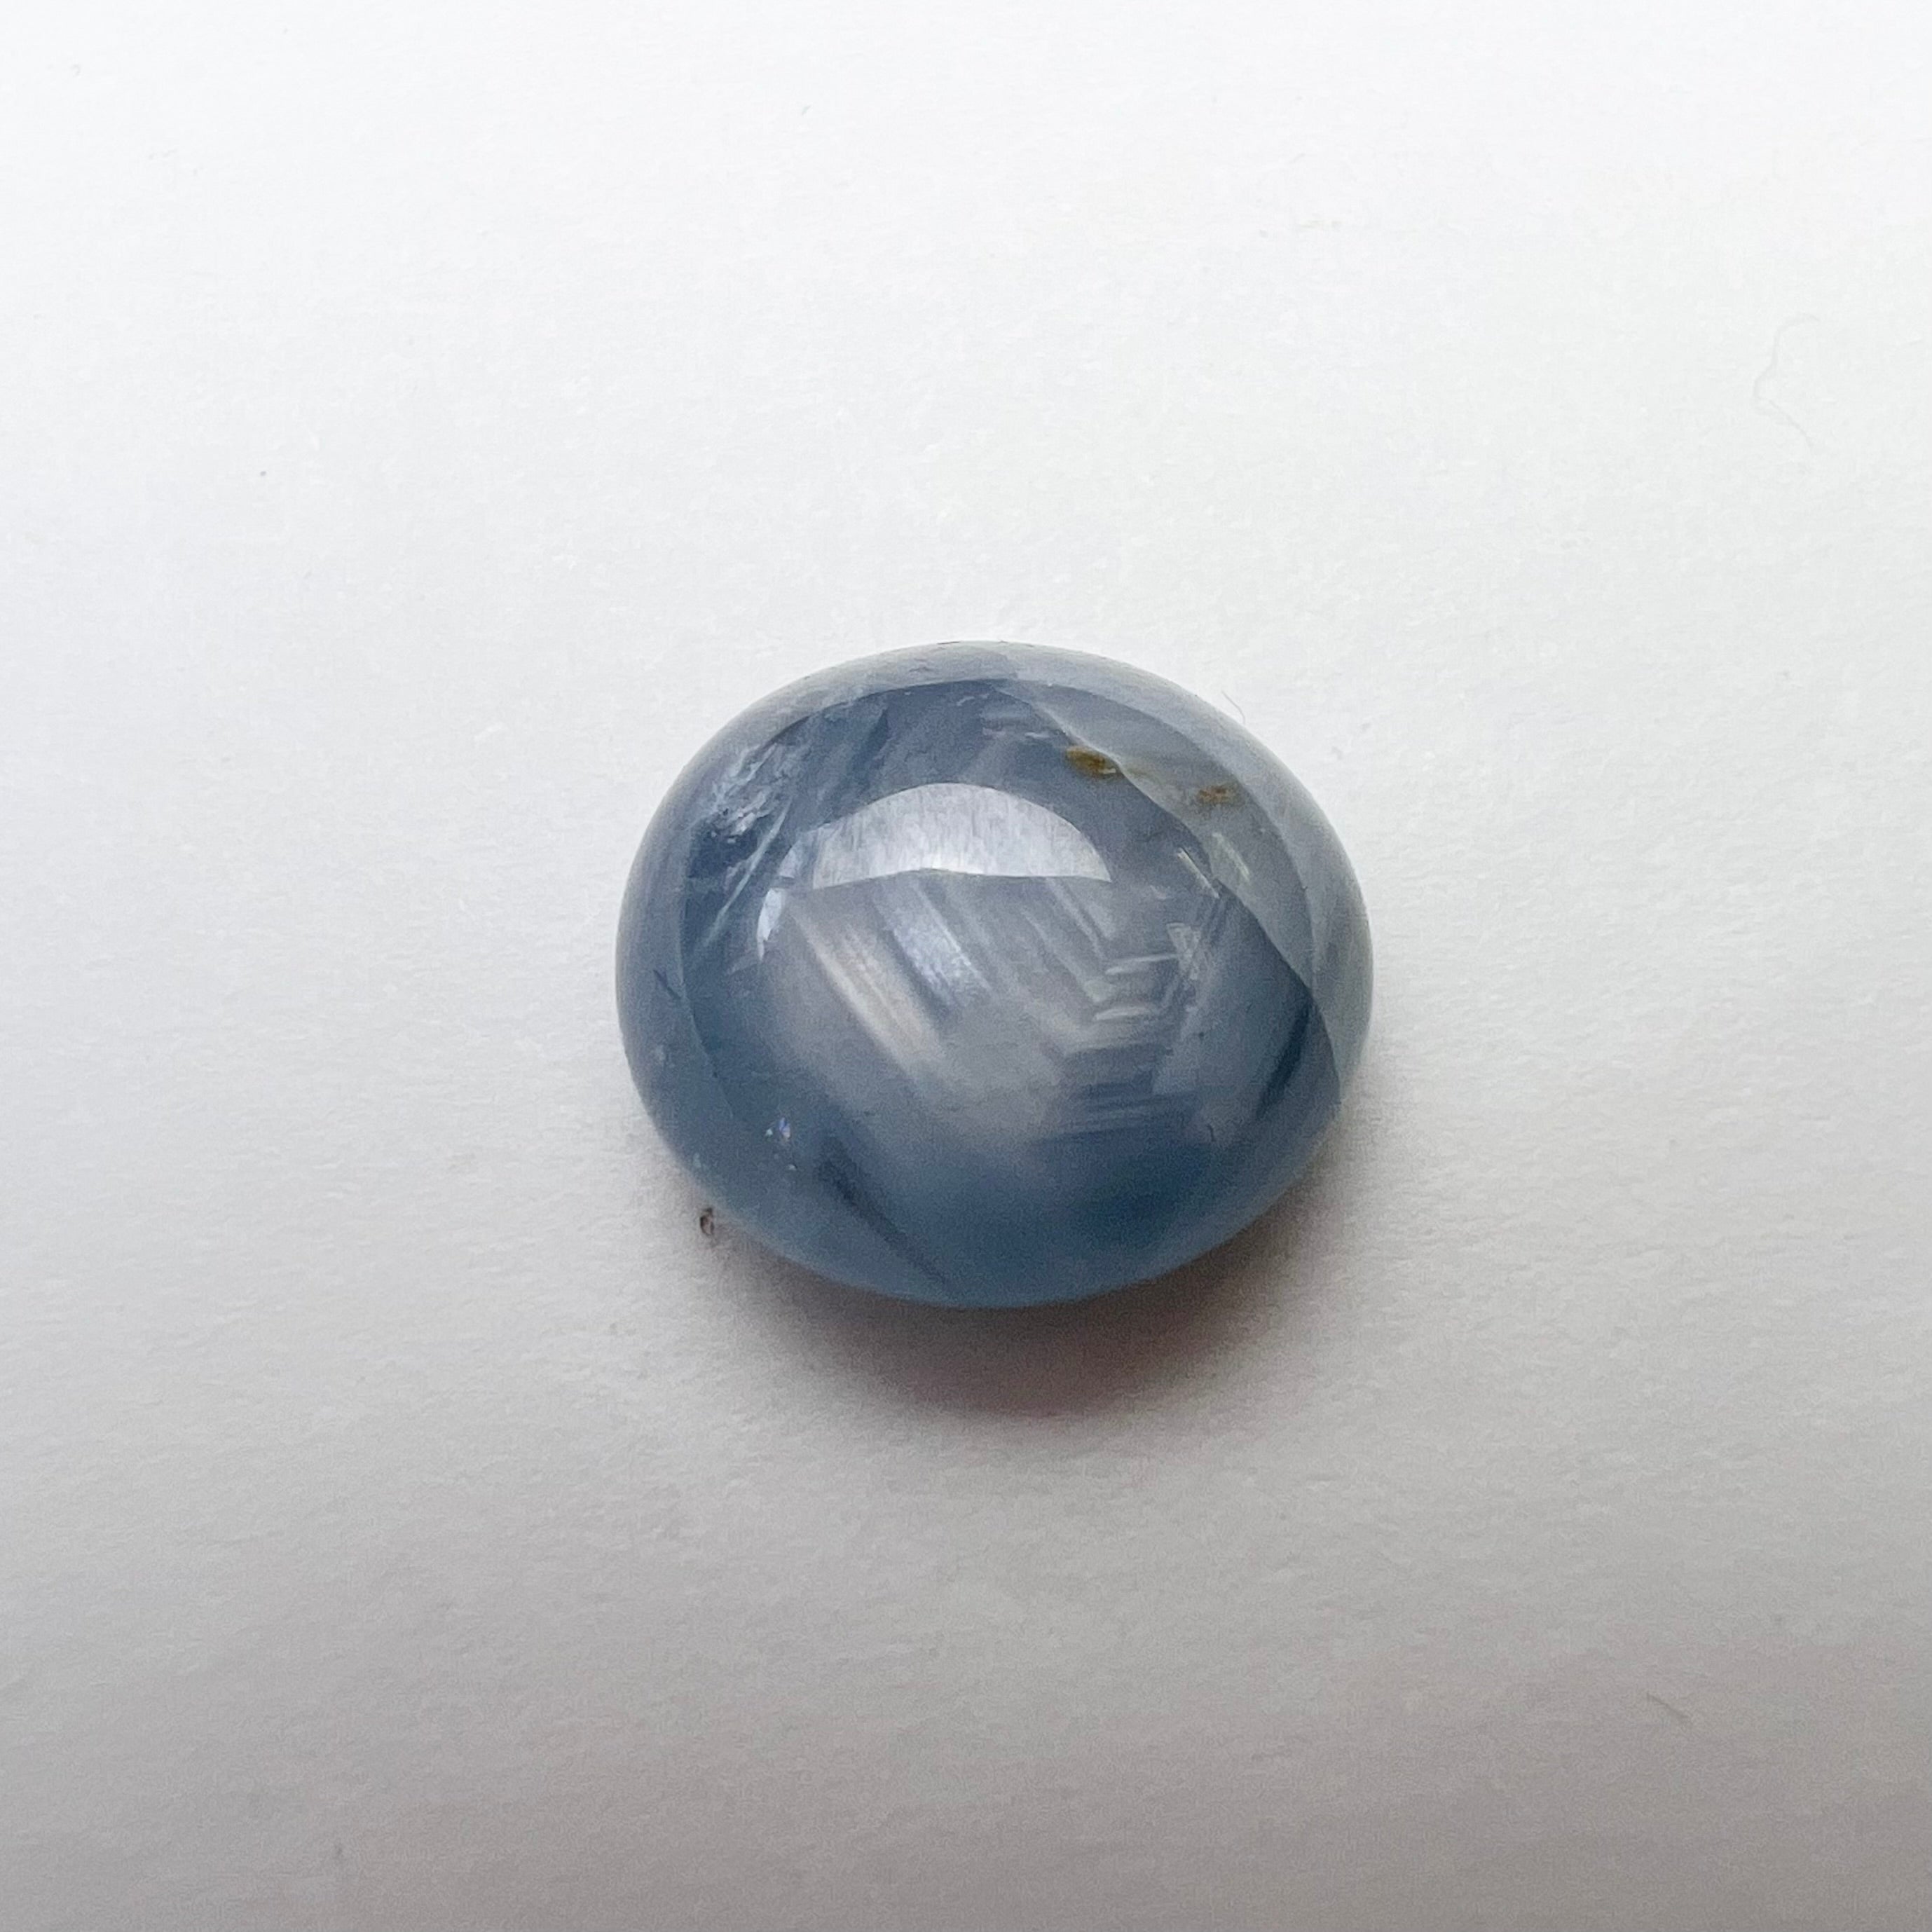 10.35CTW Loose Natural Cabochon Sapphire 12.49x11.10mm Earth mined Gemstone